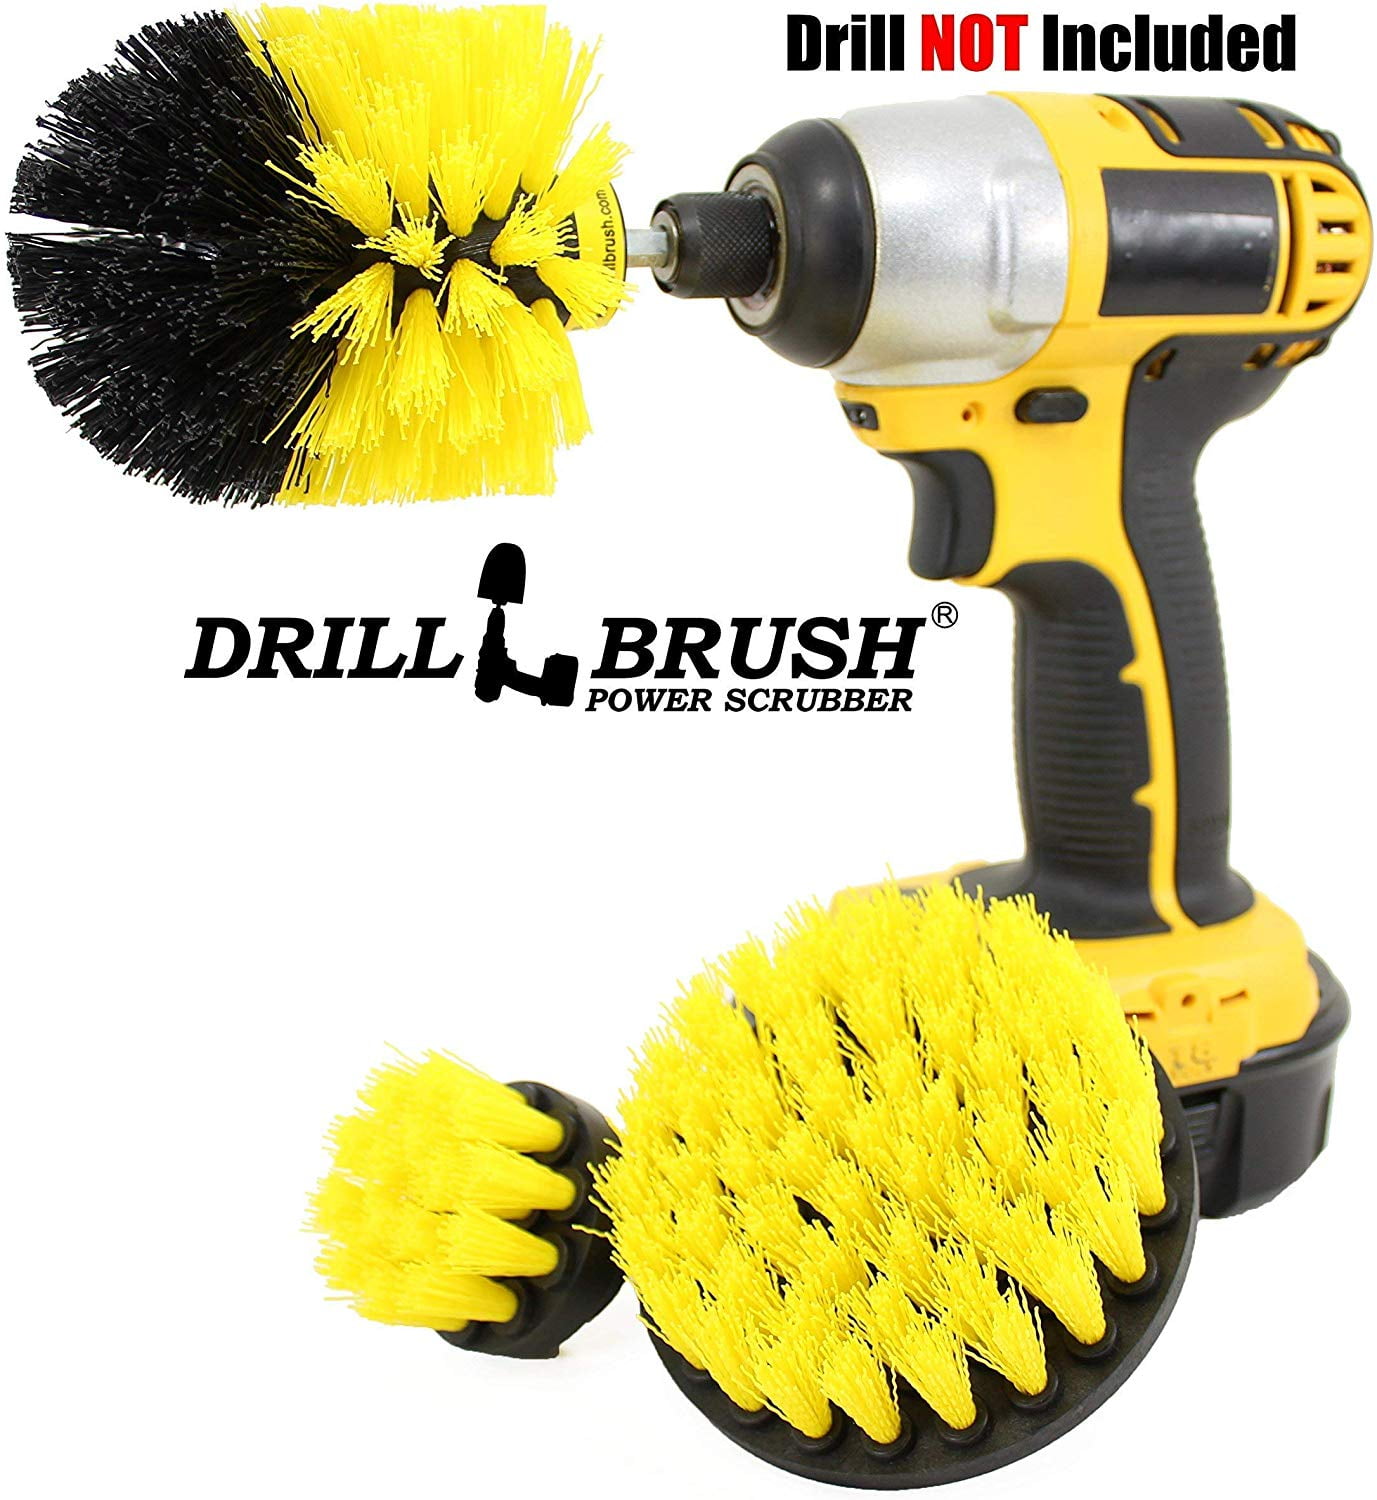 Power Scrubber Drill Brush Clean for Bathroom Surfaces Tub Shower Tile Grout 